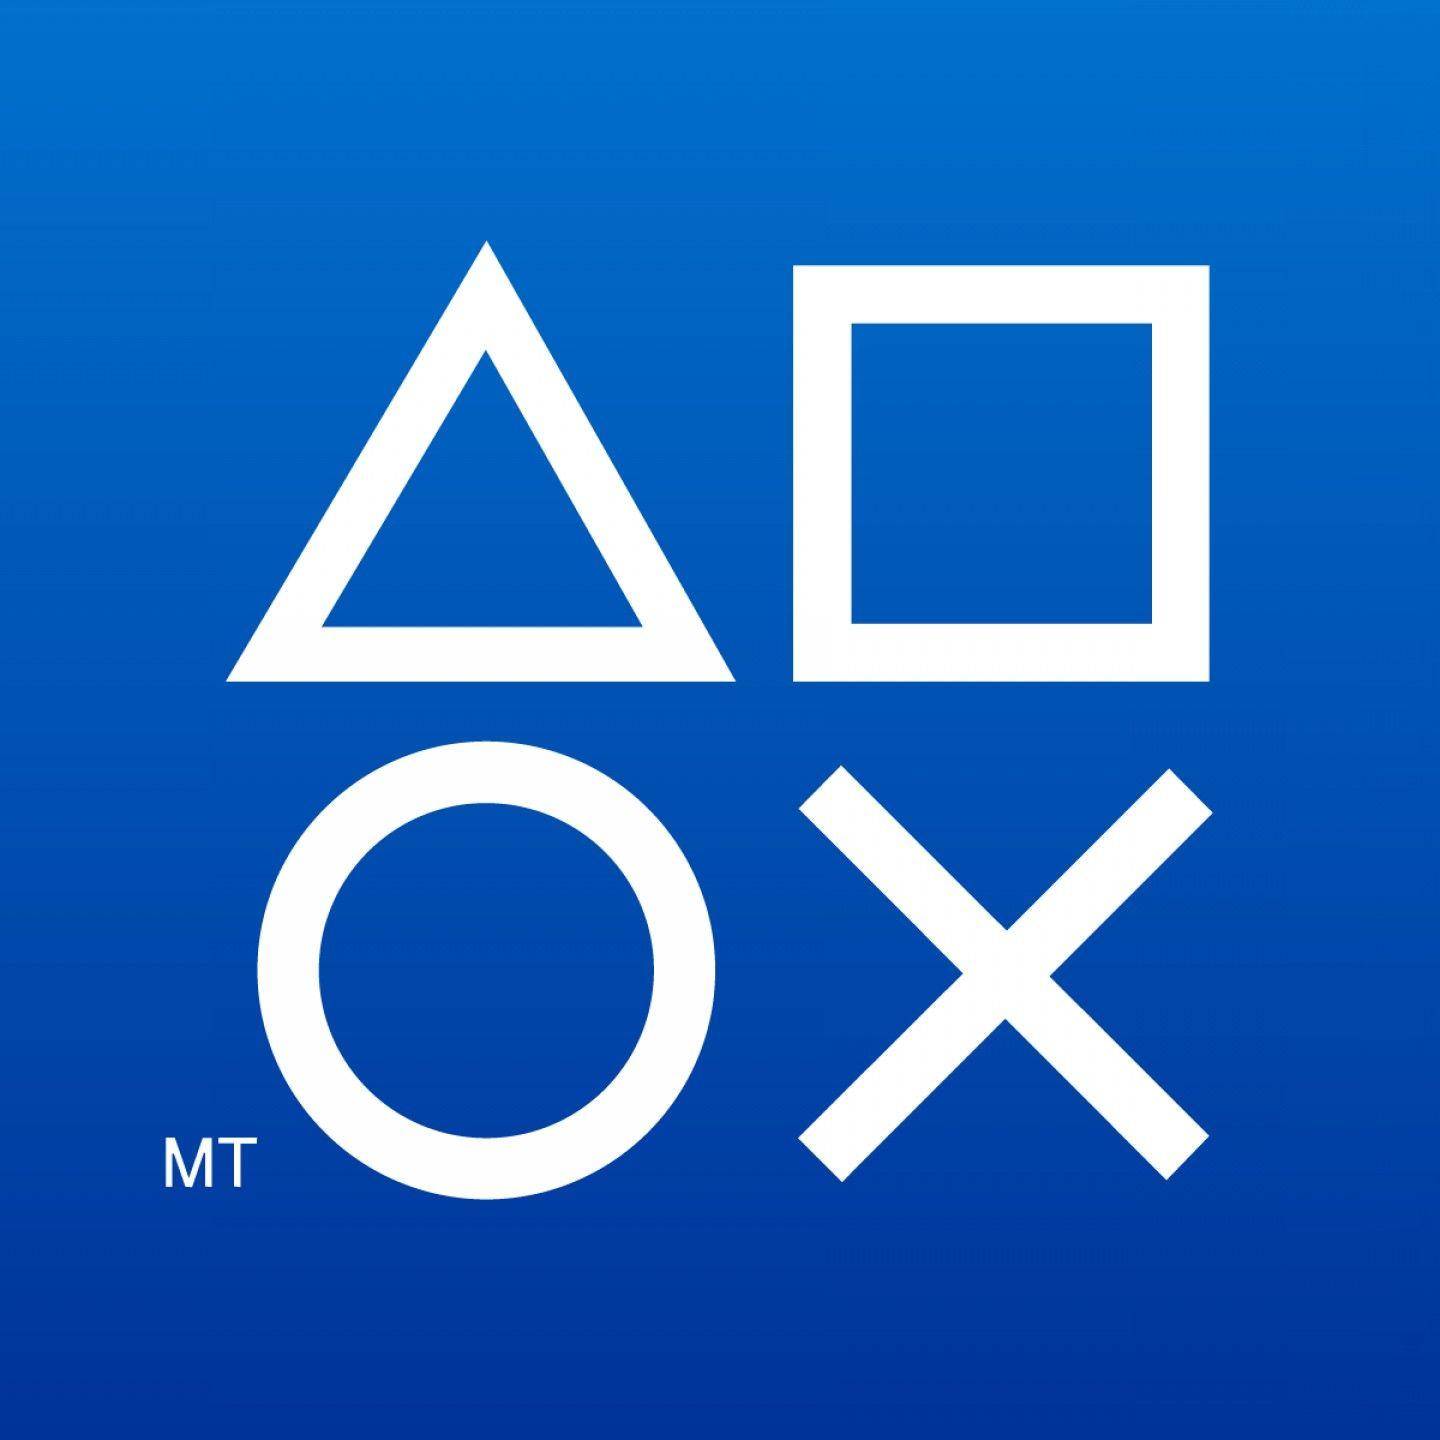 PSX Logo - Psx Playstation Experience App Icon Logo Vector | GeekChicPro